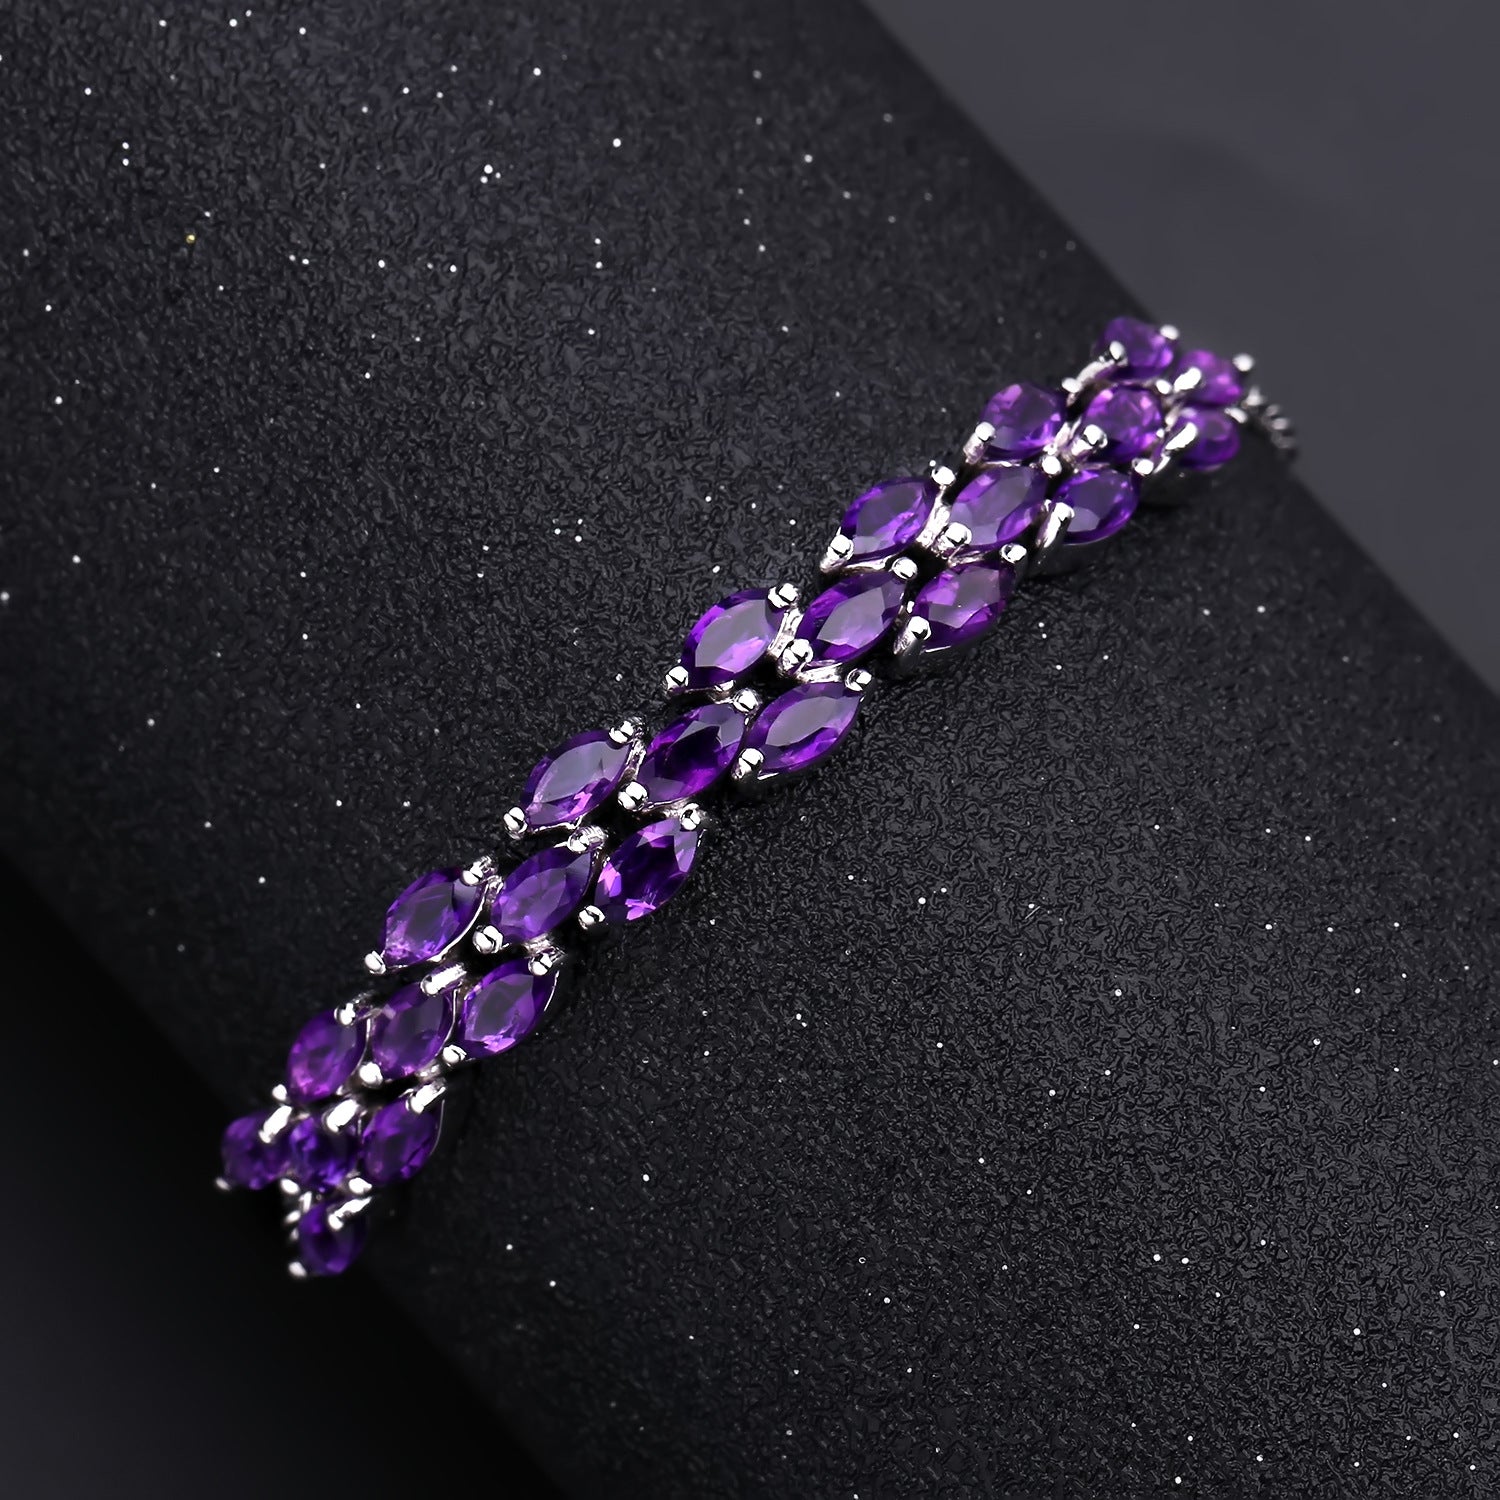 European and American Style Princess Temperament Natural Amethyst Silver Bracelet for Women